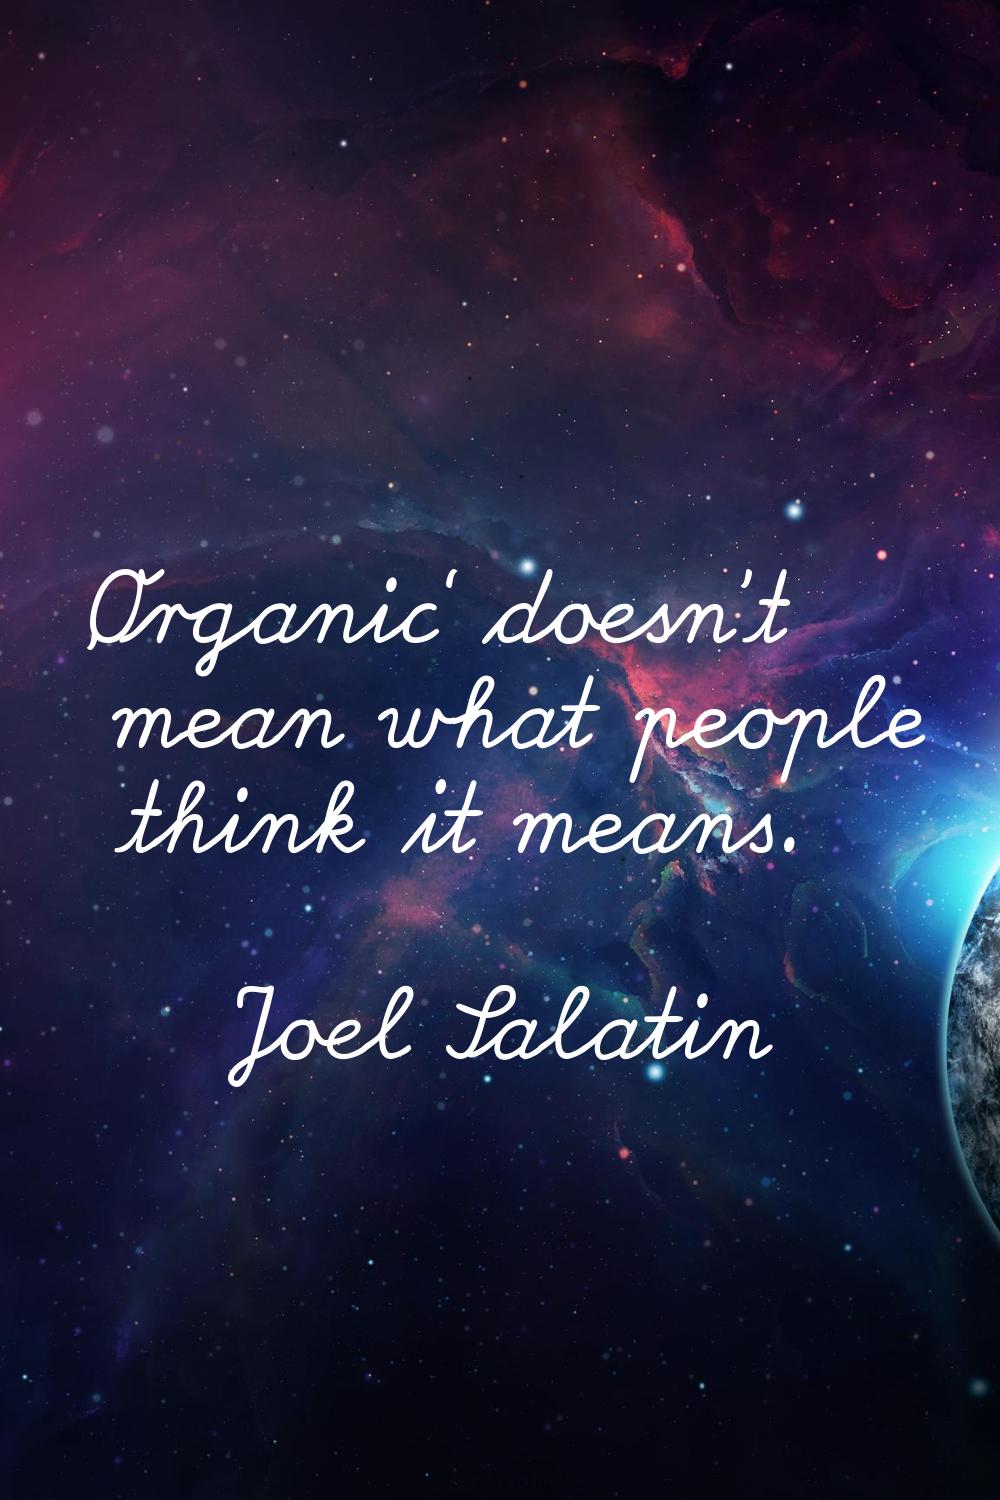 'Organic' doesn't mean what people think it means.